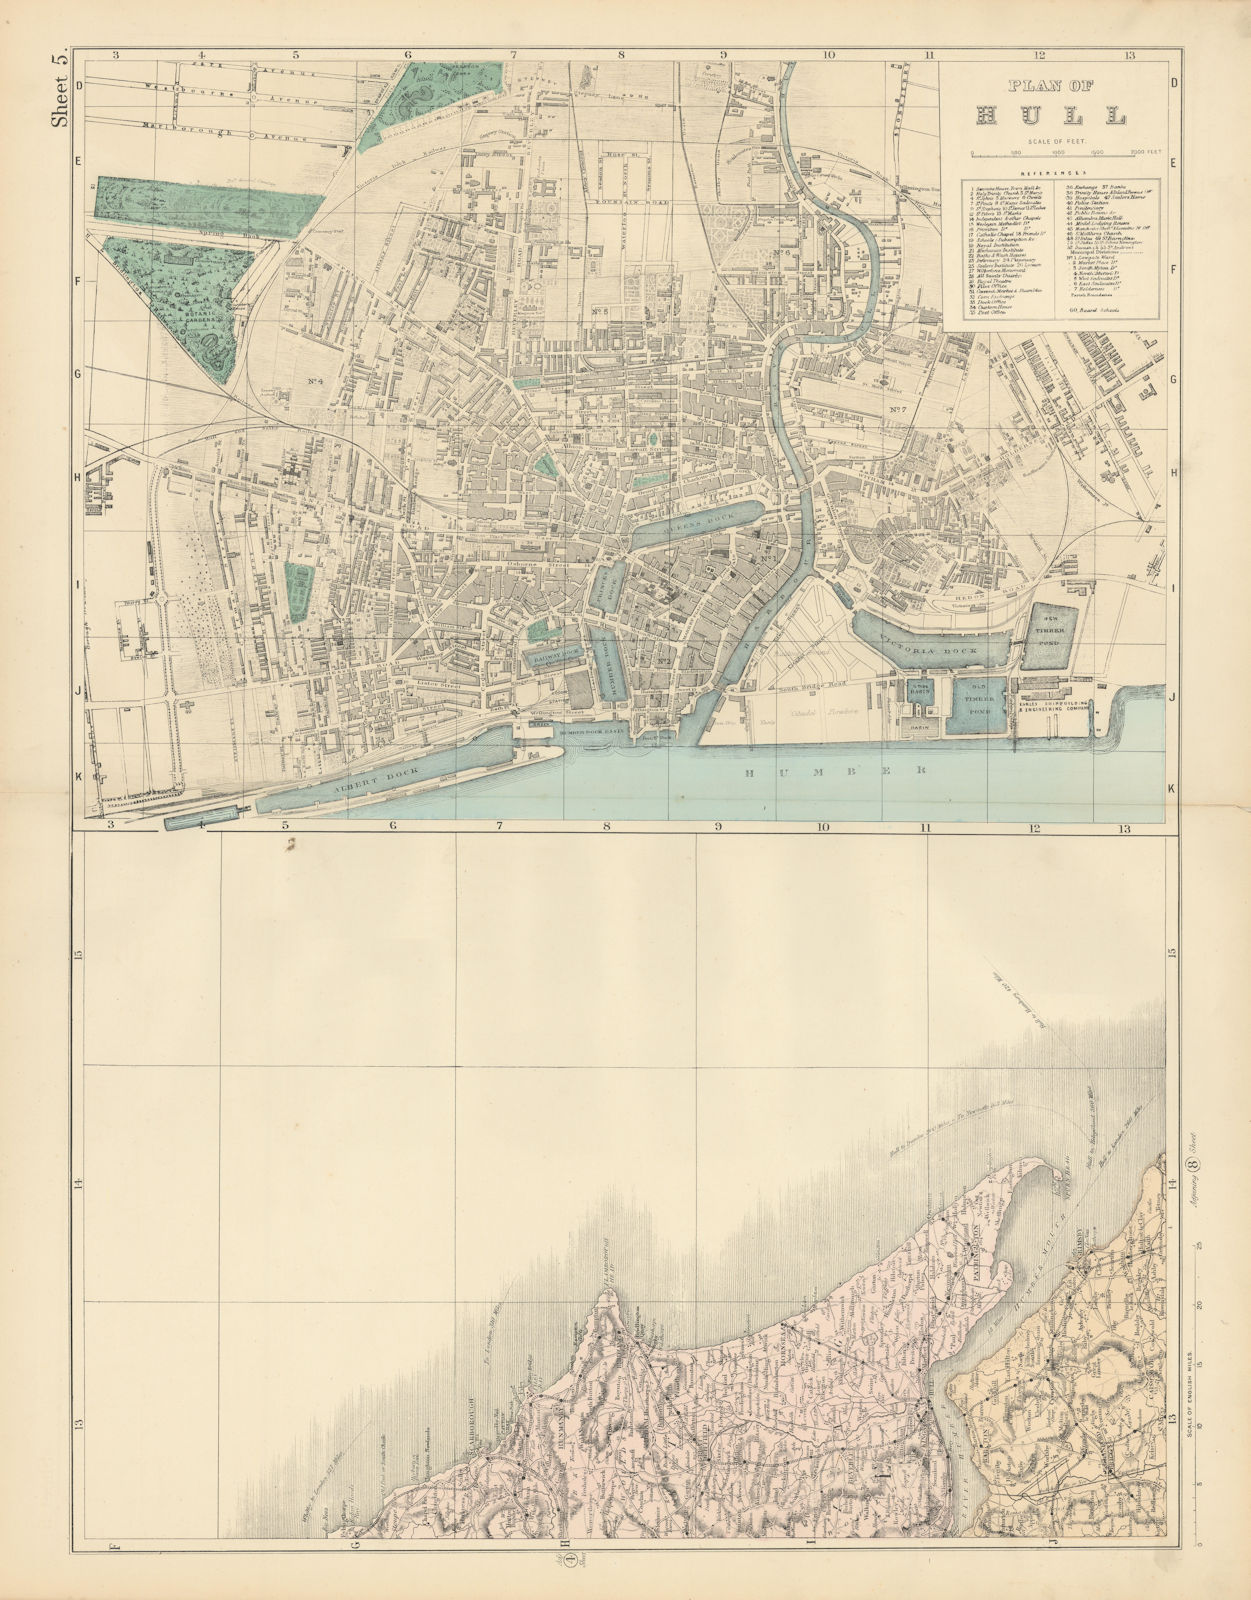 Associate Product Yorkshire Coast & Humberside. Hull antique city plan. BACON 1883 old map